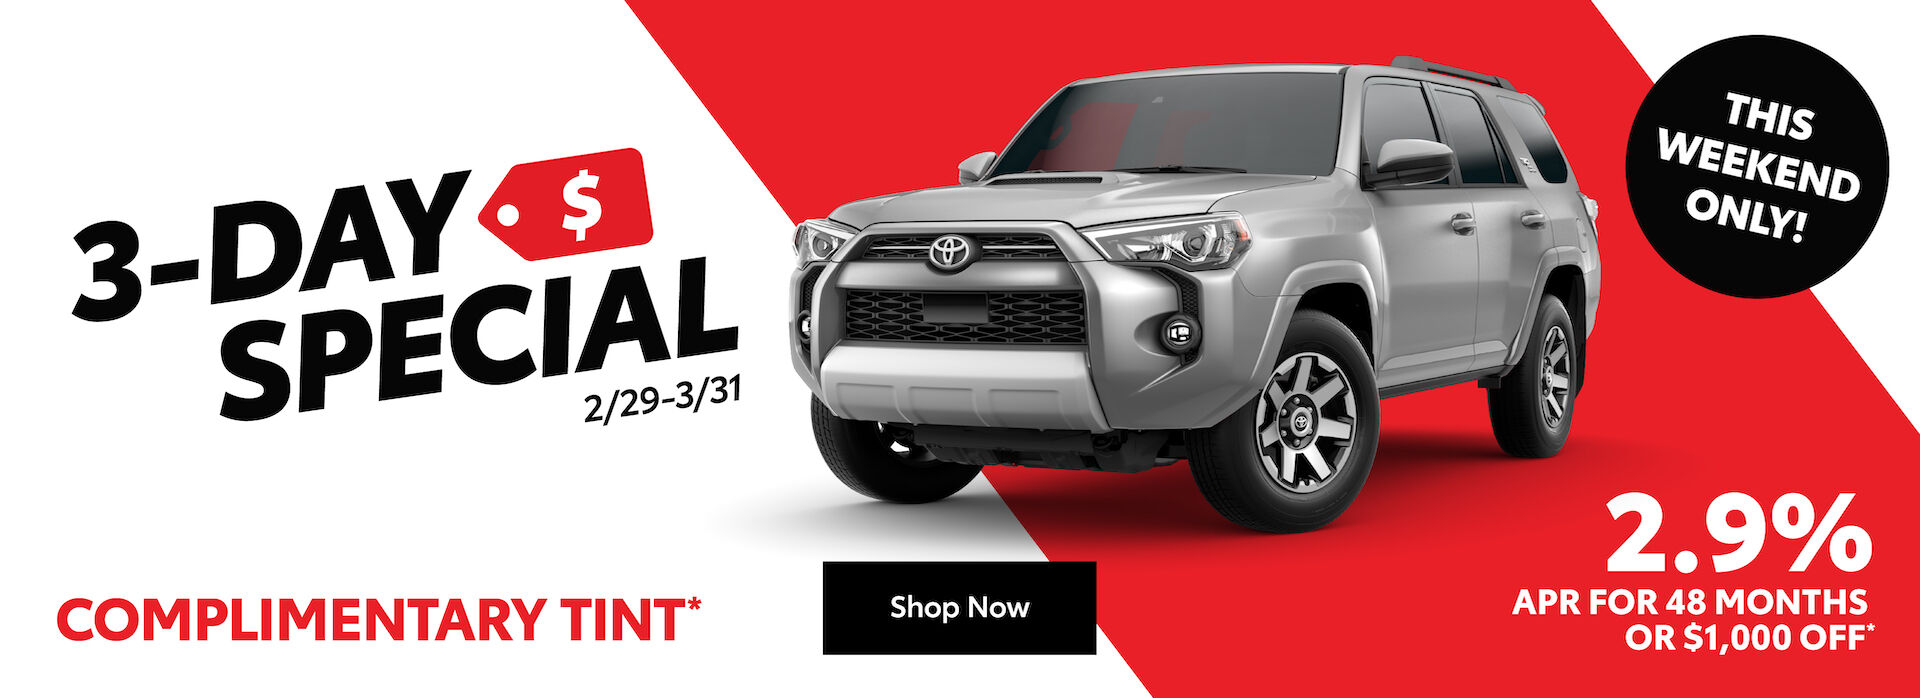 Servco Toyota 3-Day Special! Get 2.9% APR for 48 months or $1,000 off, plus complimentary tint on a new 2024 4Runner.